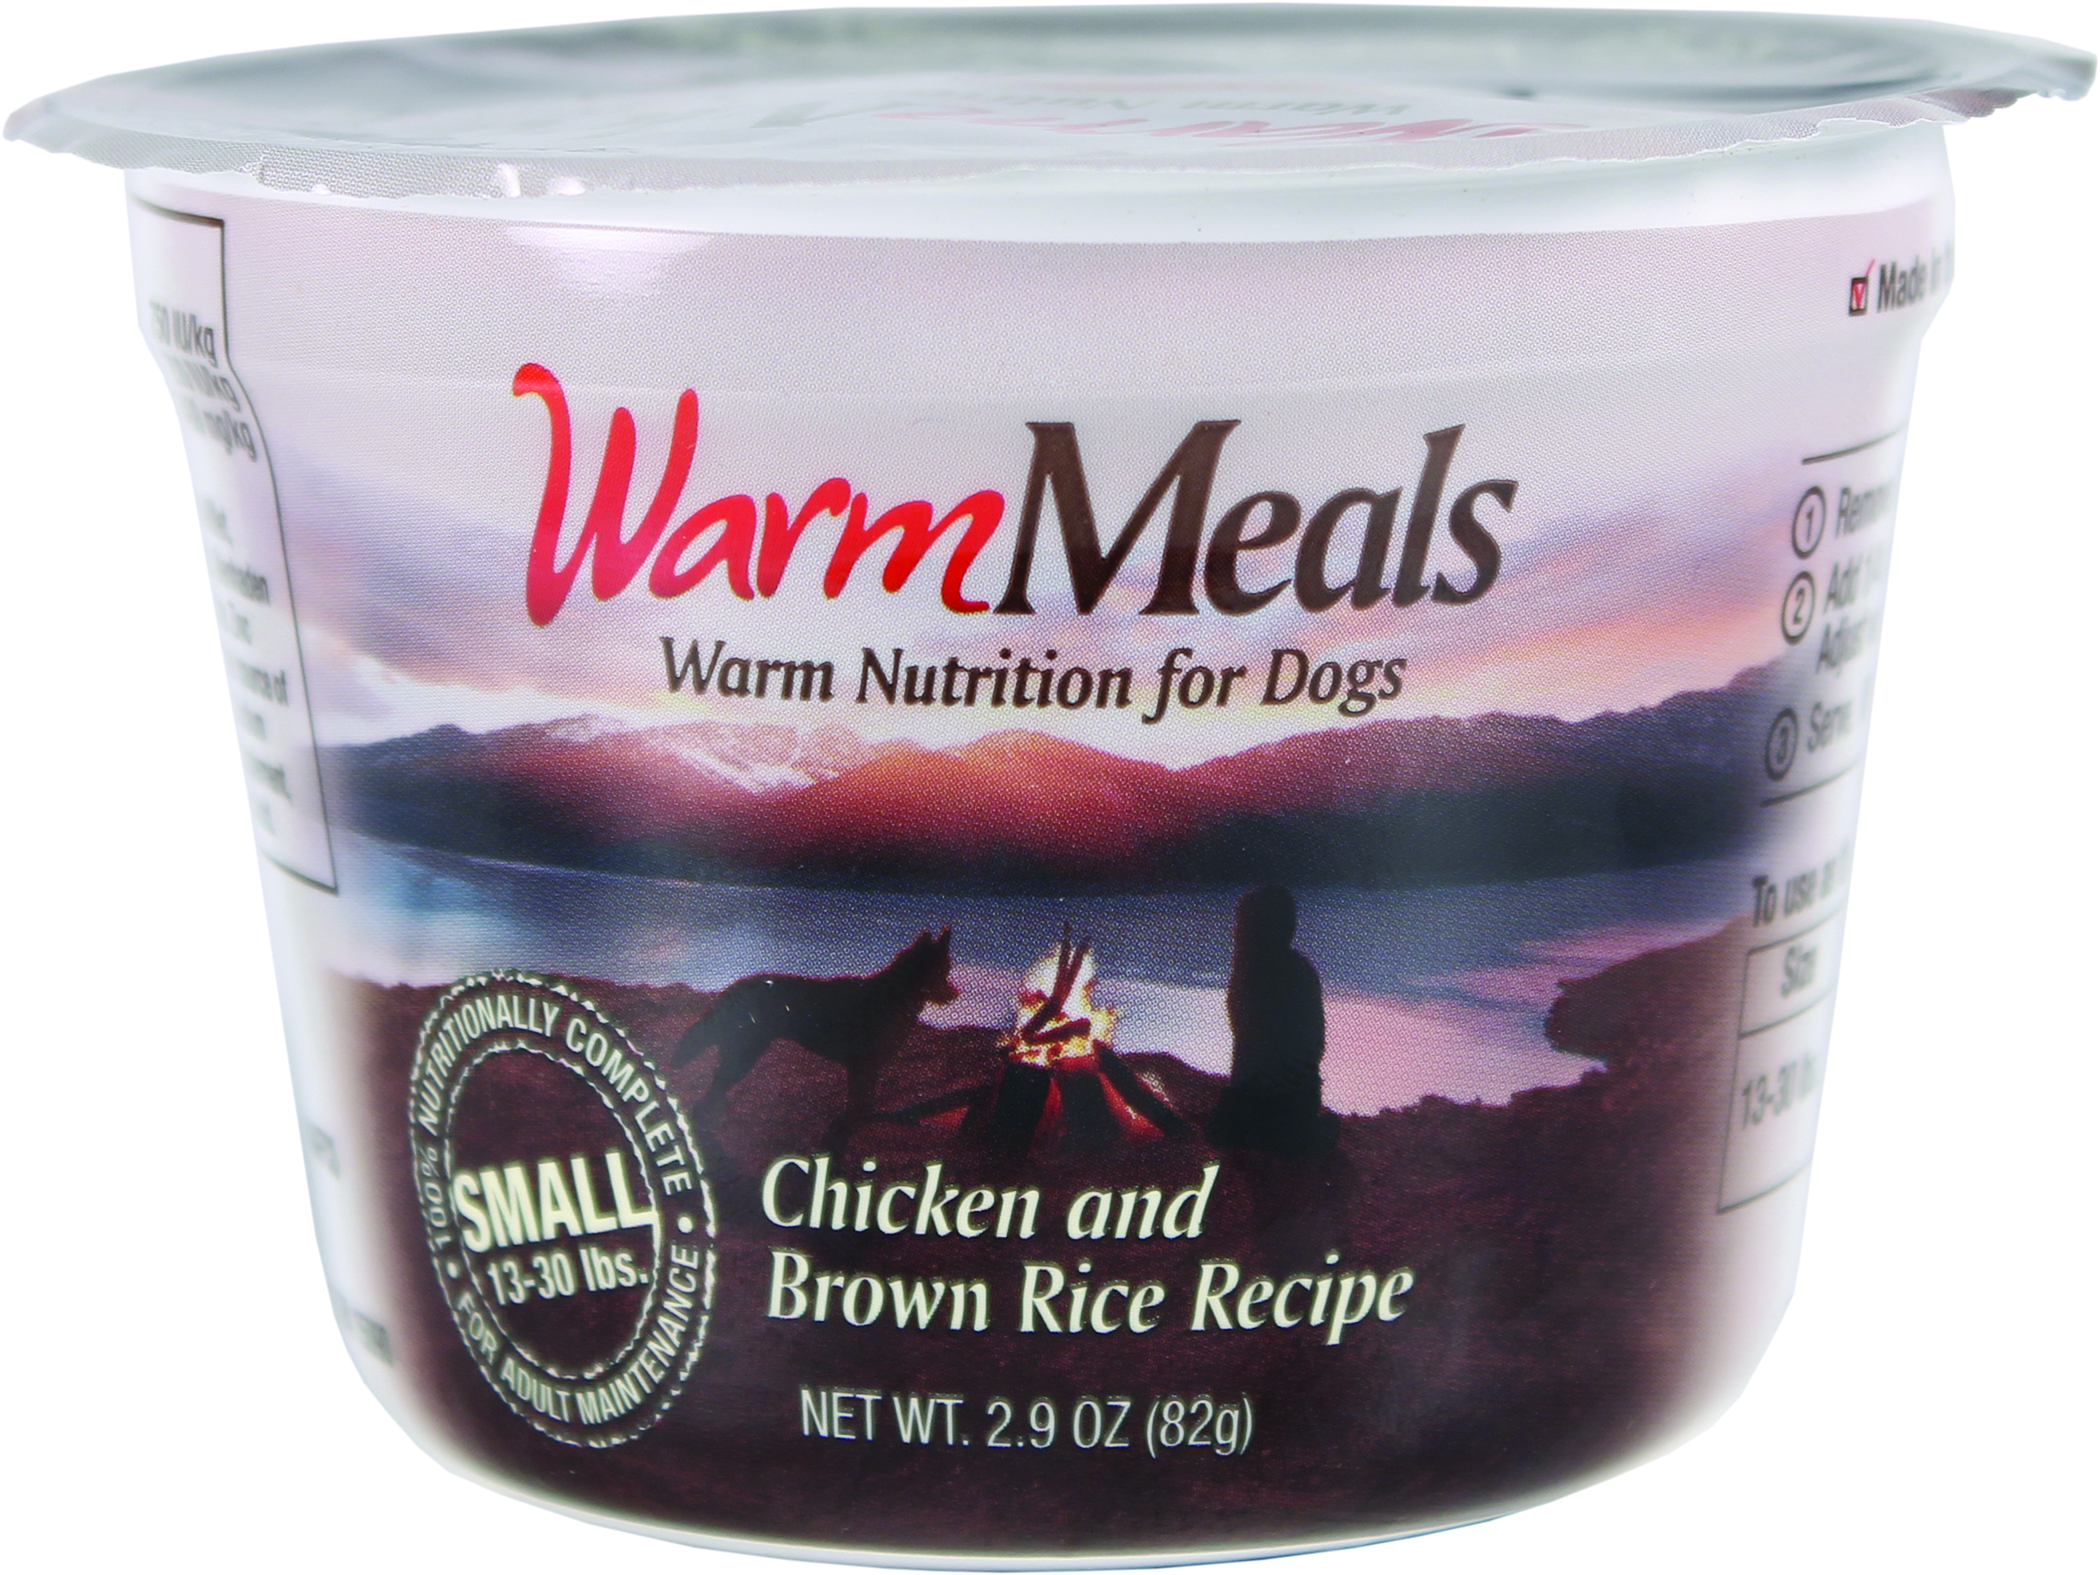 WARMMEALS WARM NUTRITION FOR DOGS